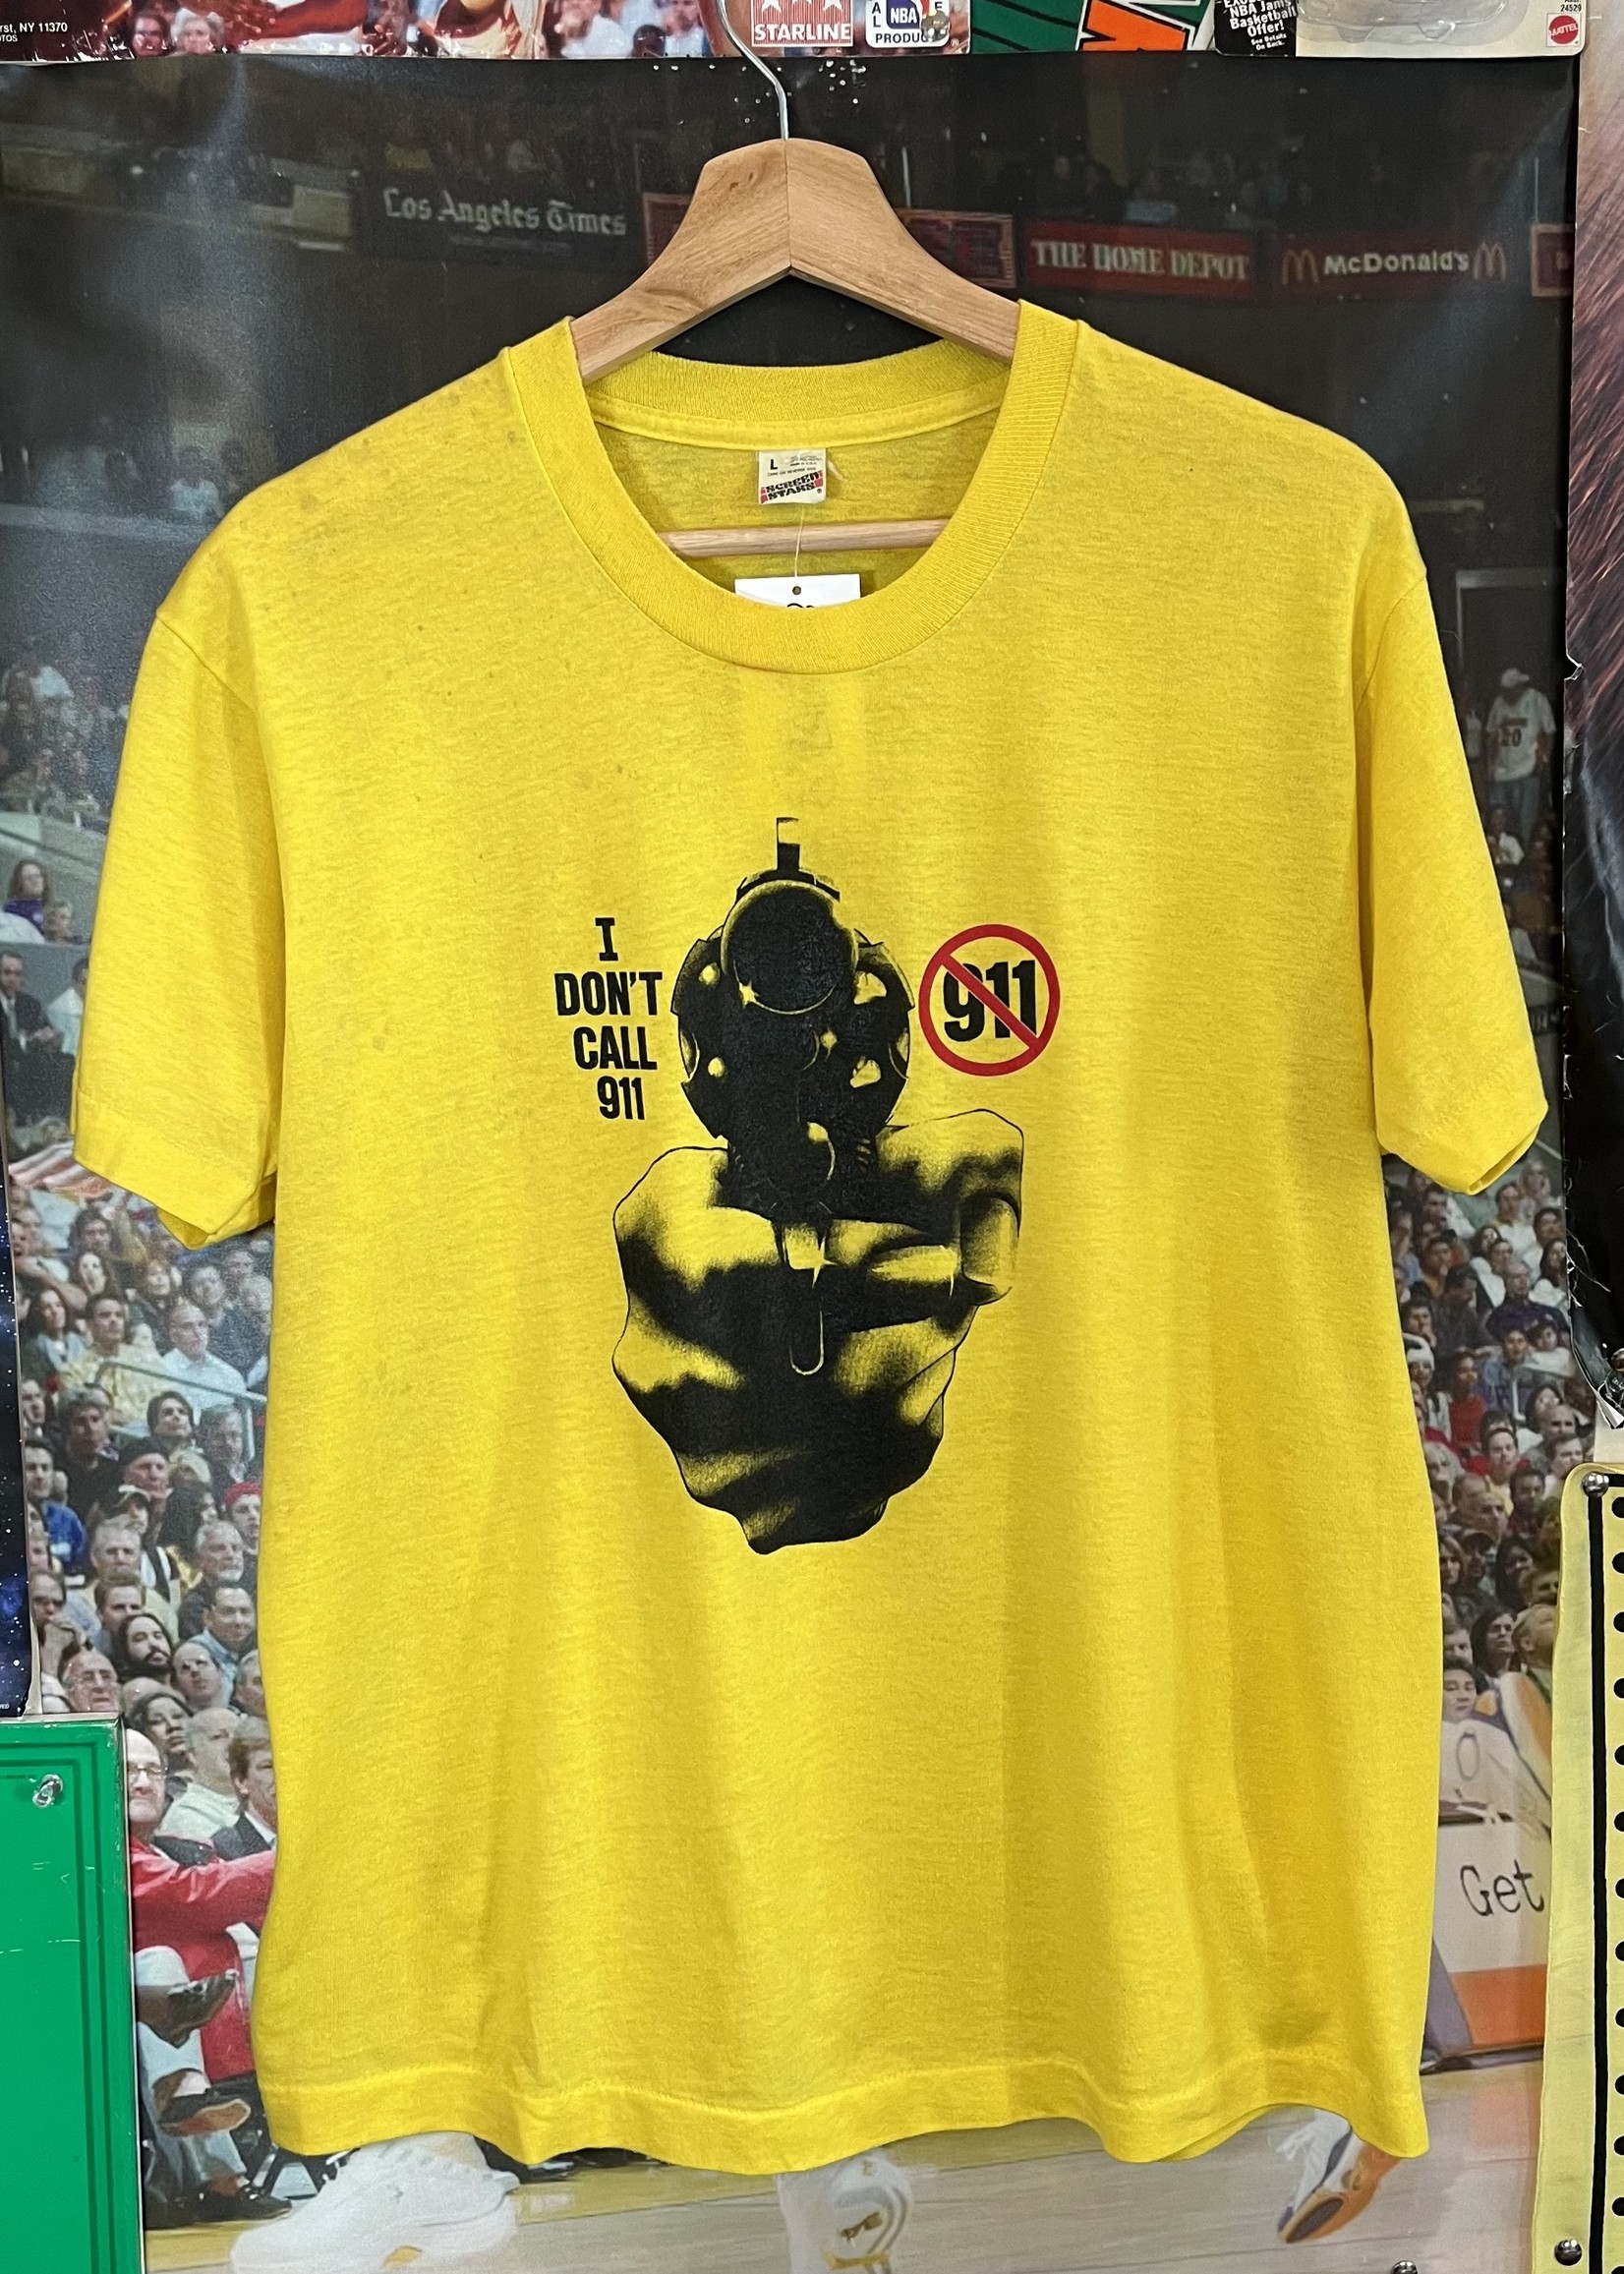 9963	i dont dial 911 yellow tee sz. M/L